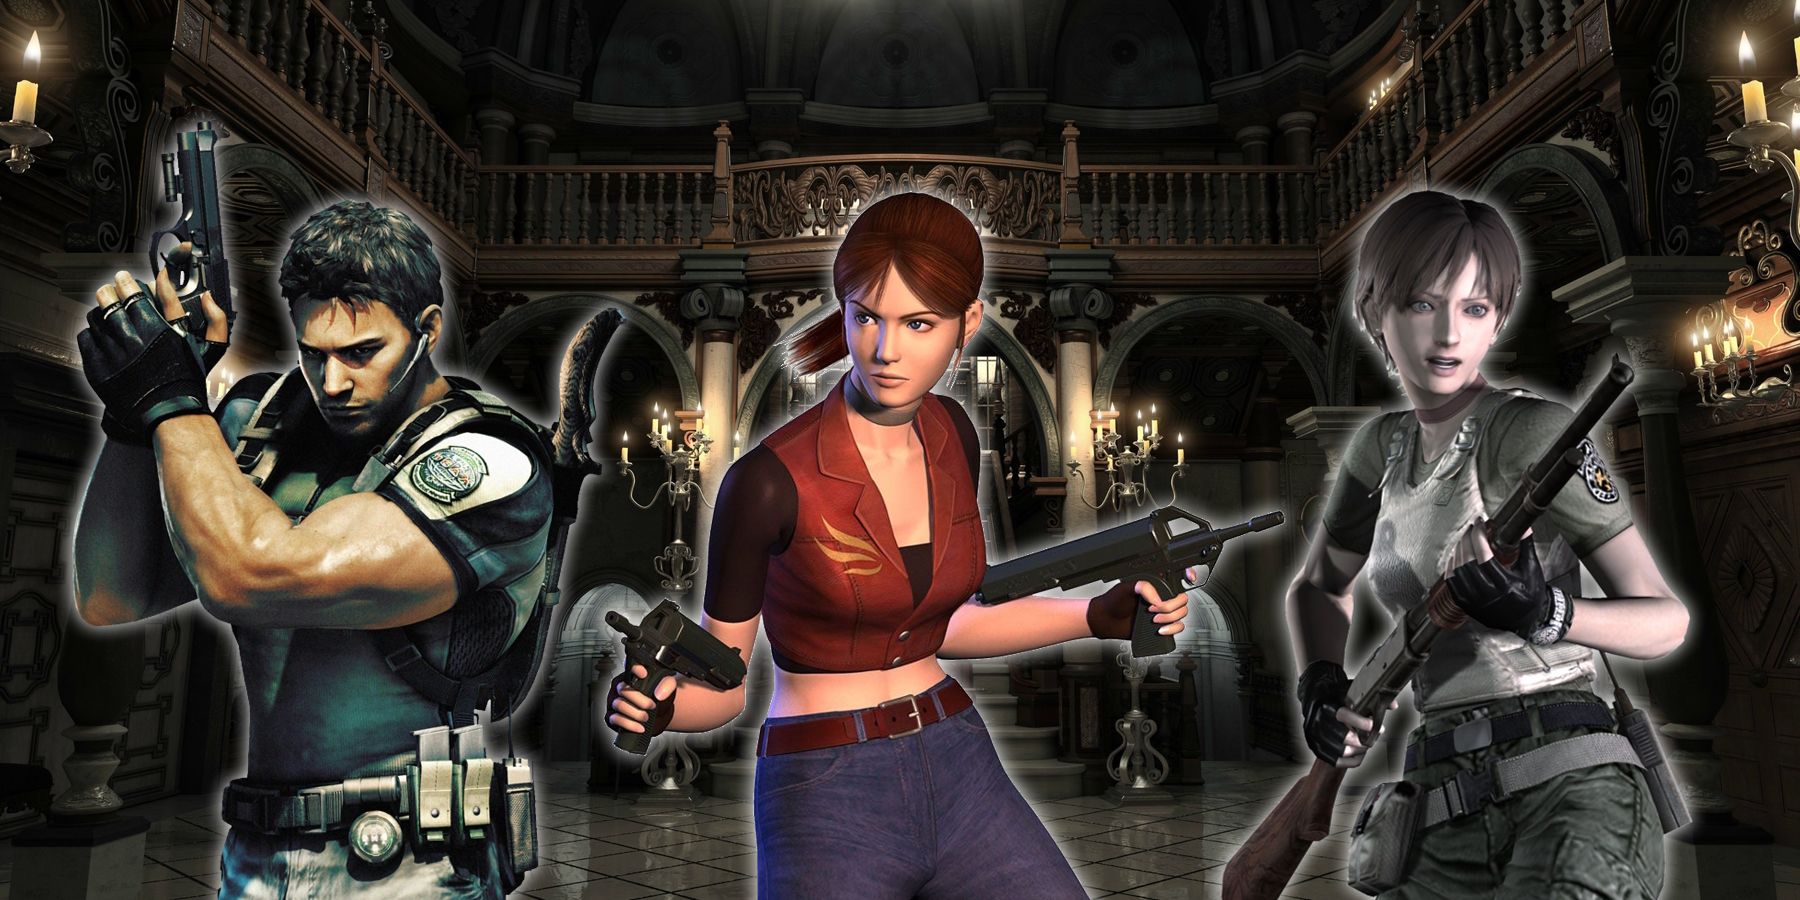 Chris Redfield, Claire Redfield, and Rebecca Chambers superimposed over the Resident Evil mansion